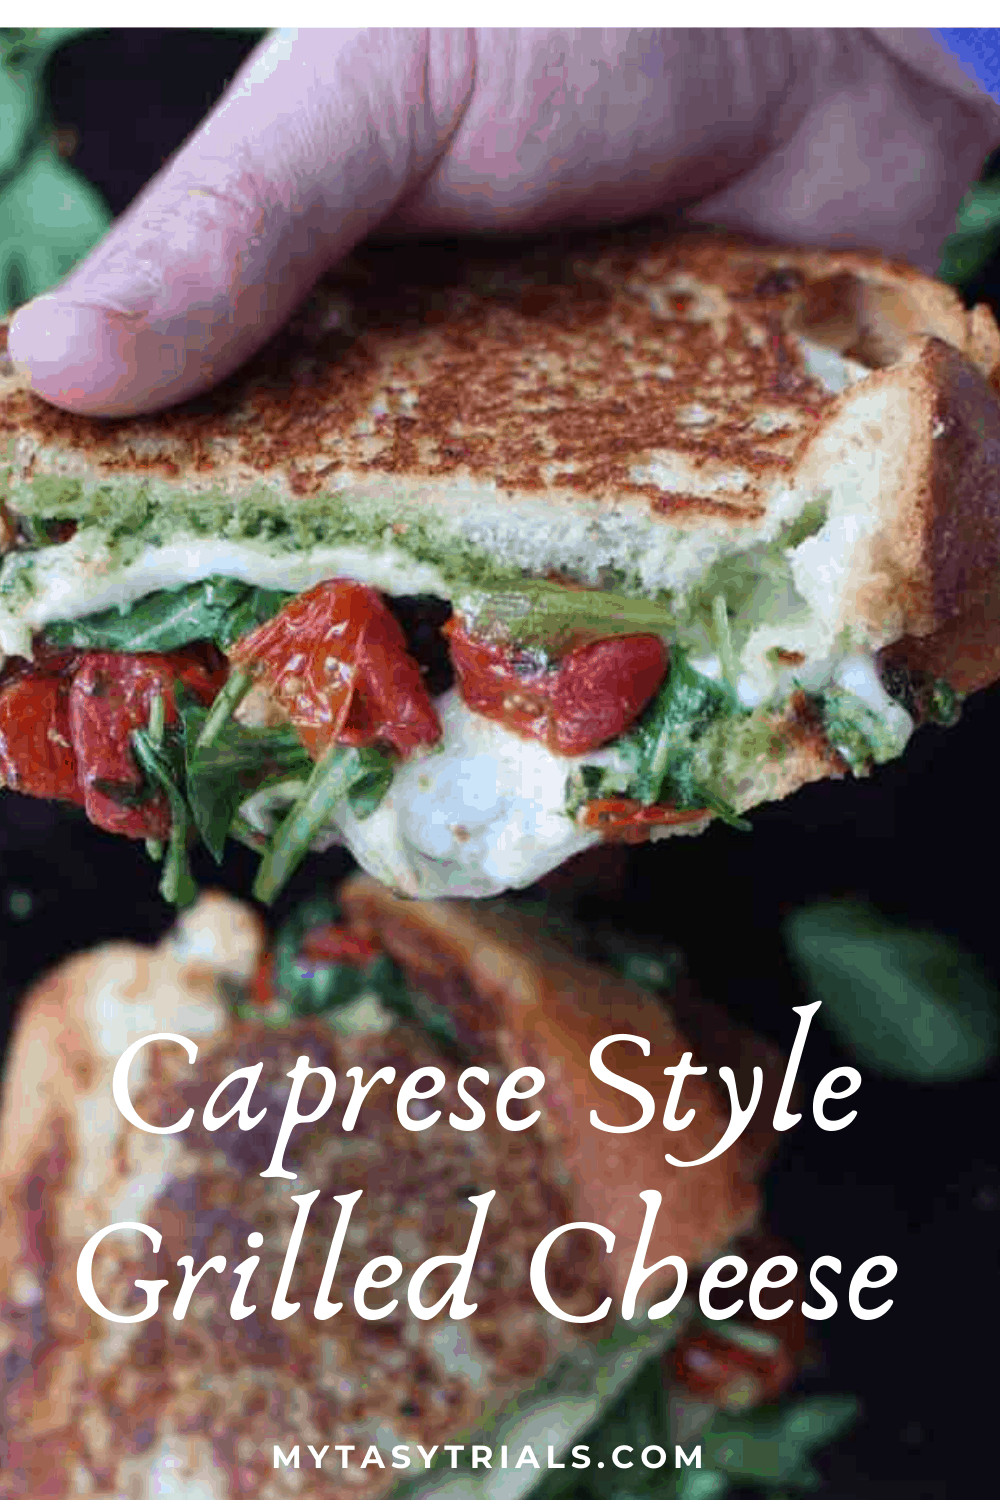 Caprese Style Grilled Cheese